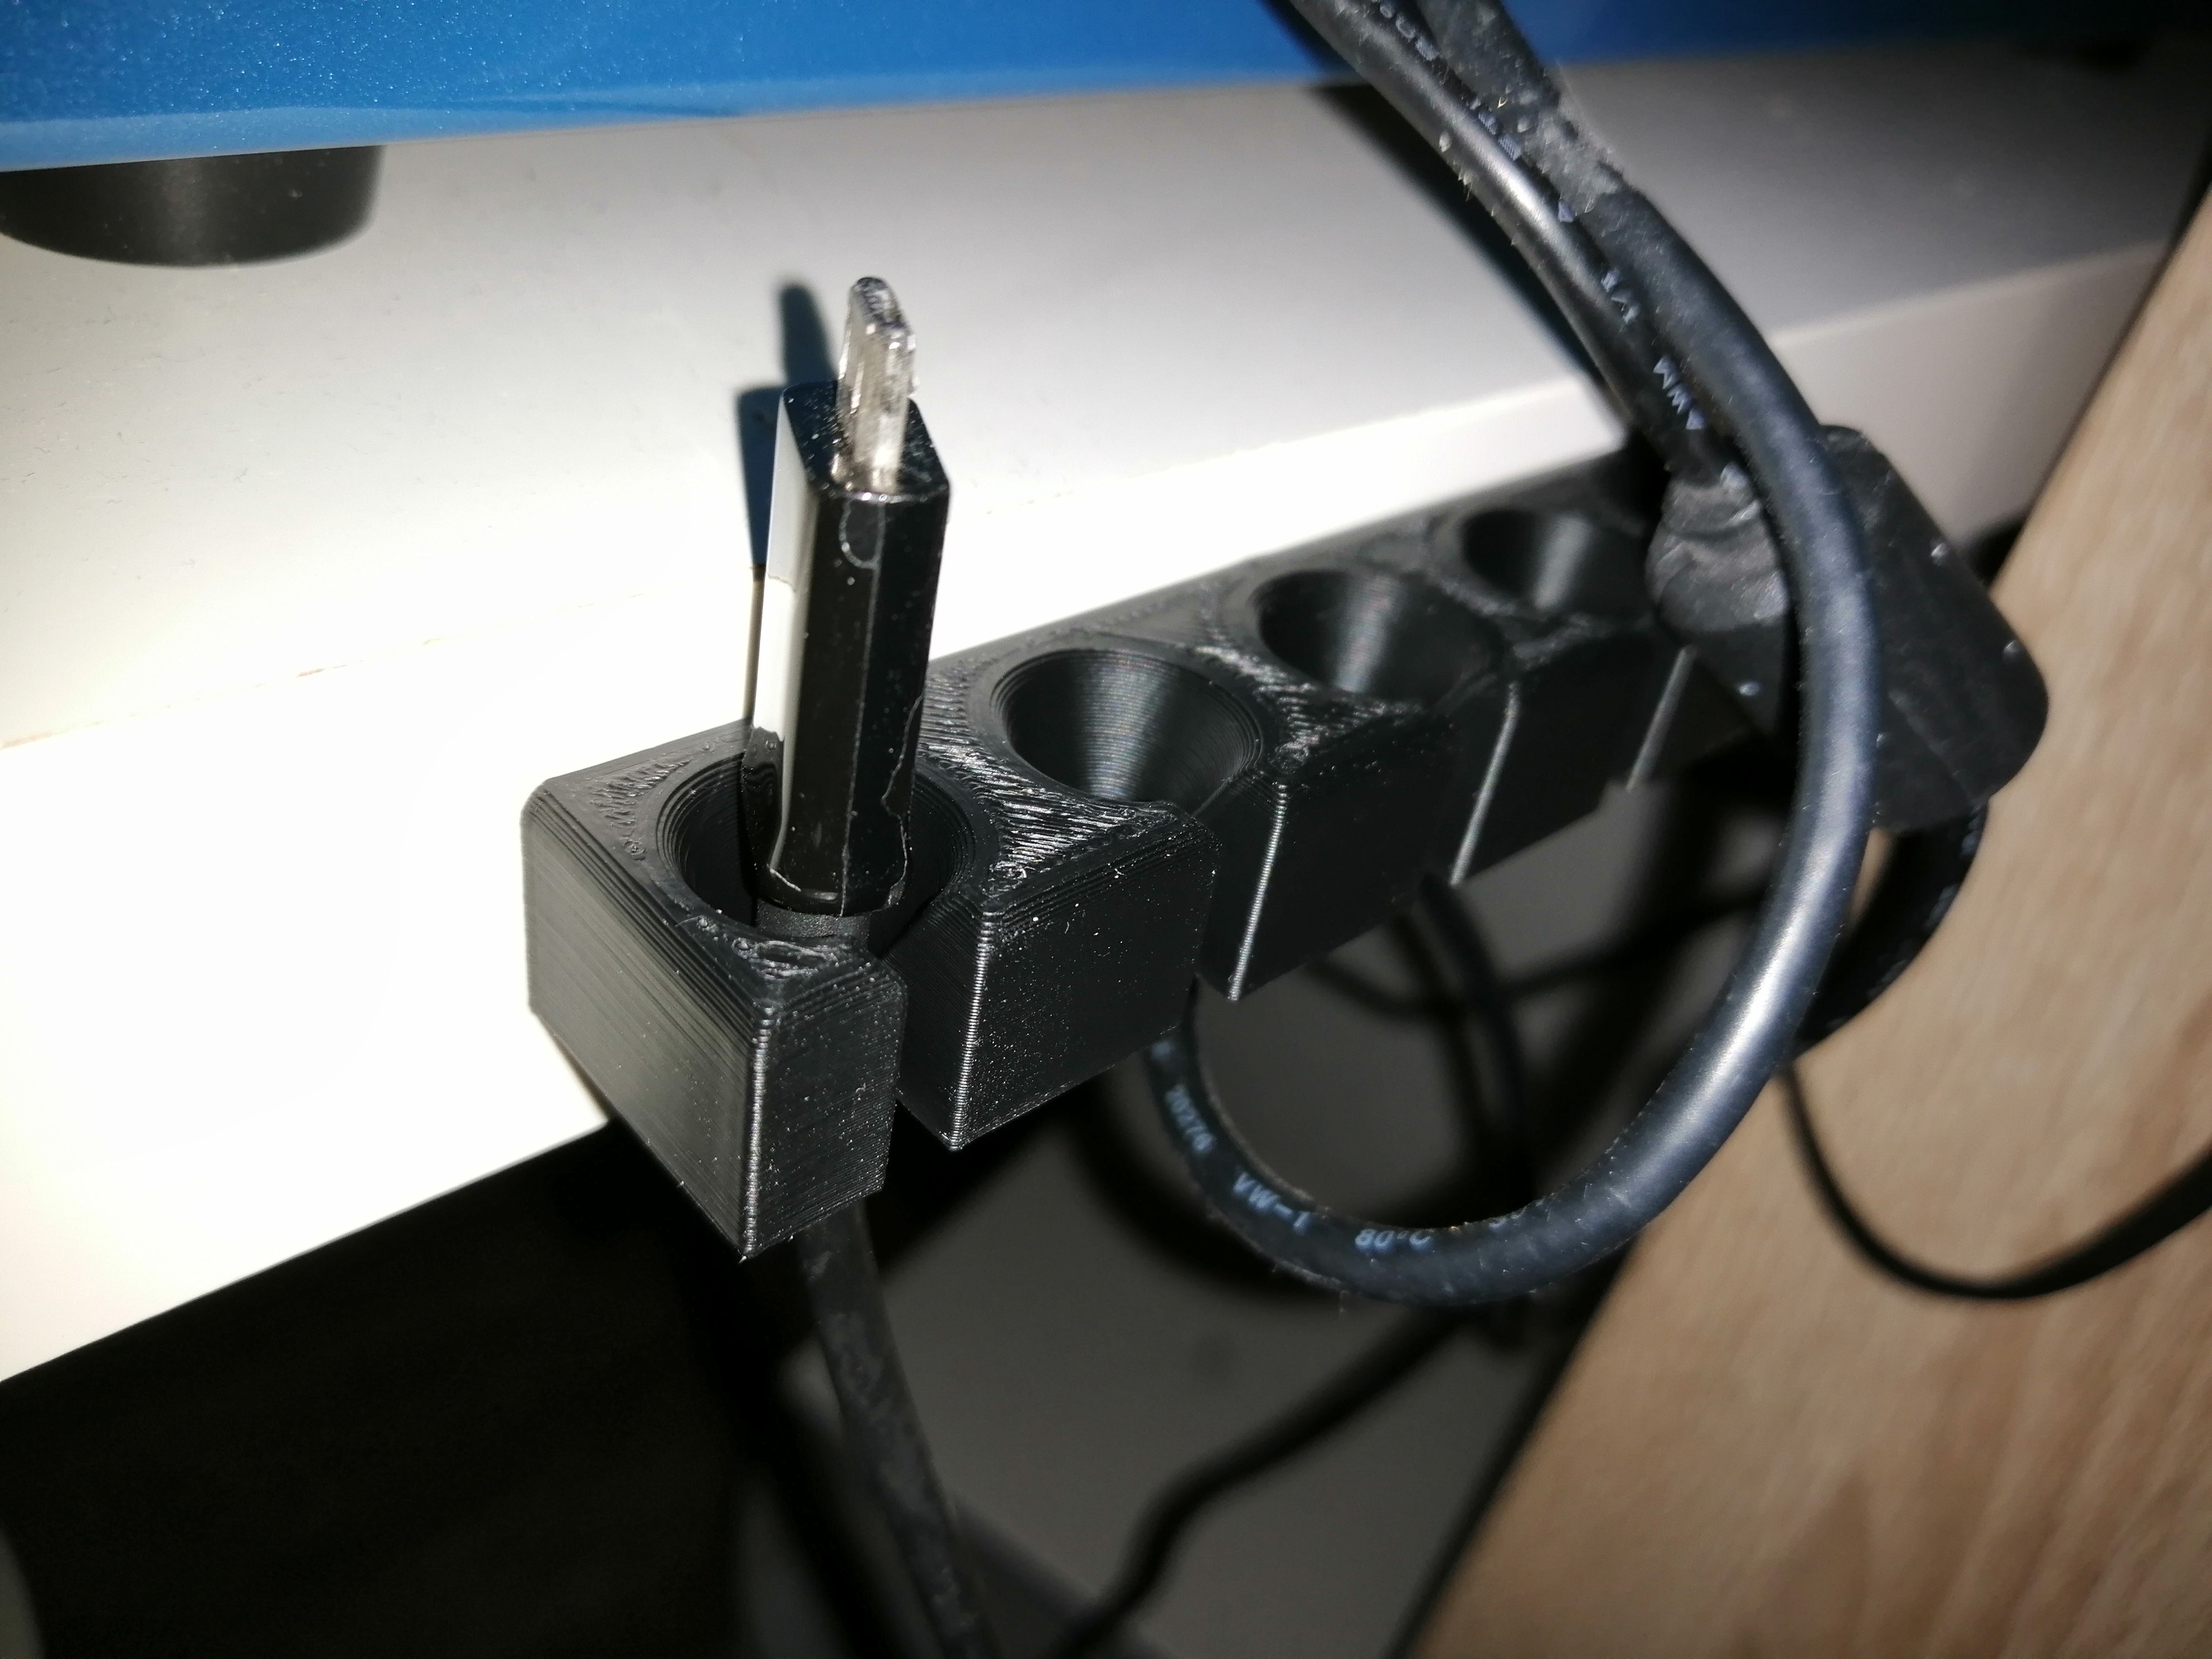 USB cable holder for organising cables